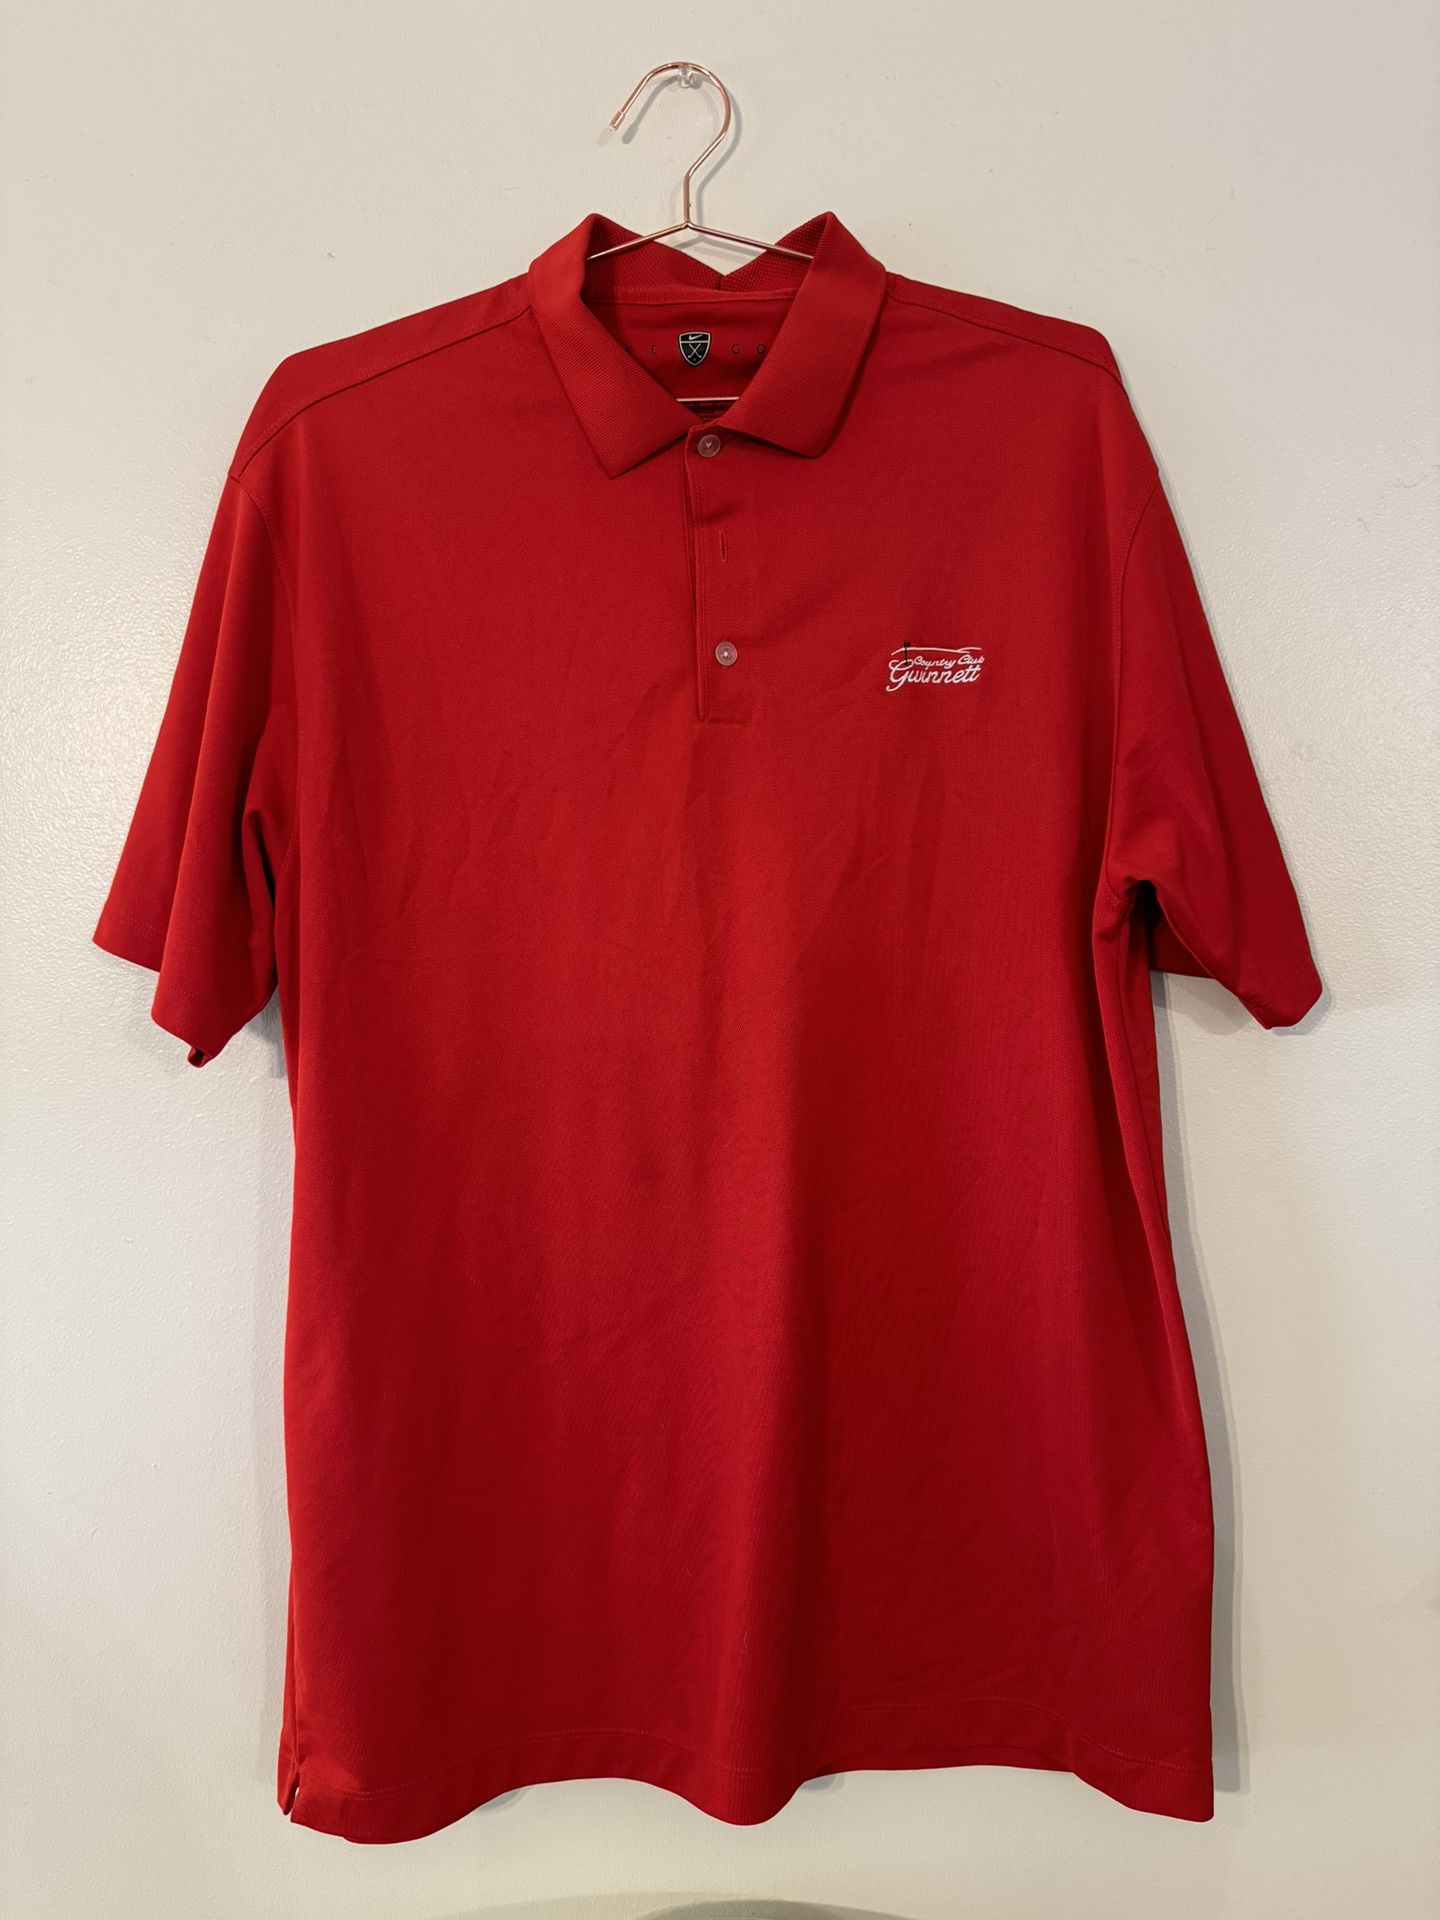 Nike Golf Polo Shirt Size XL Red